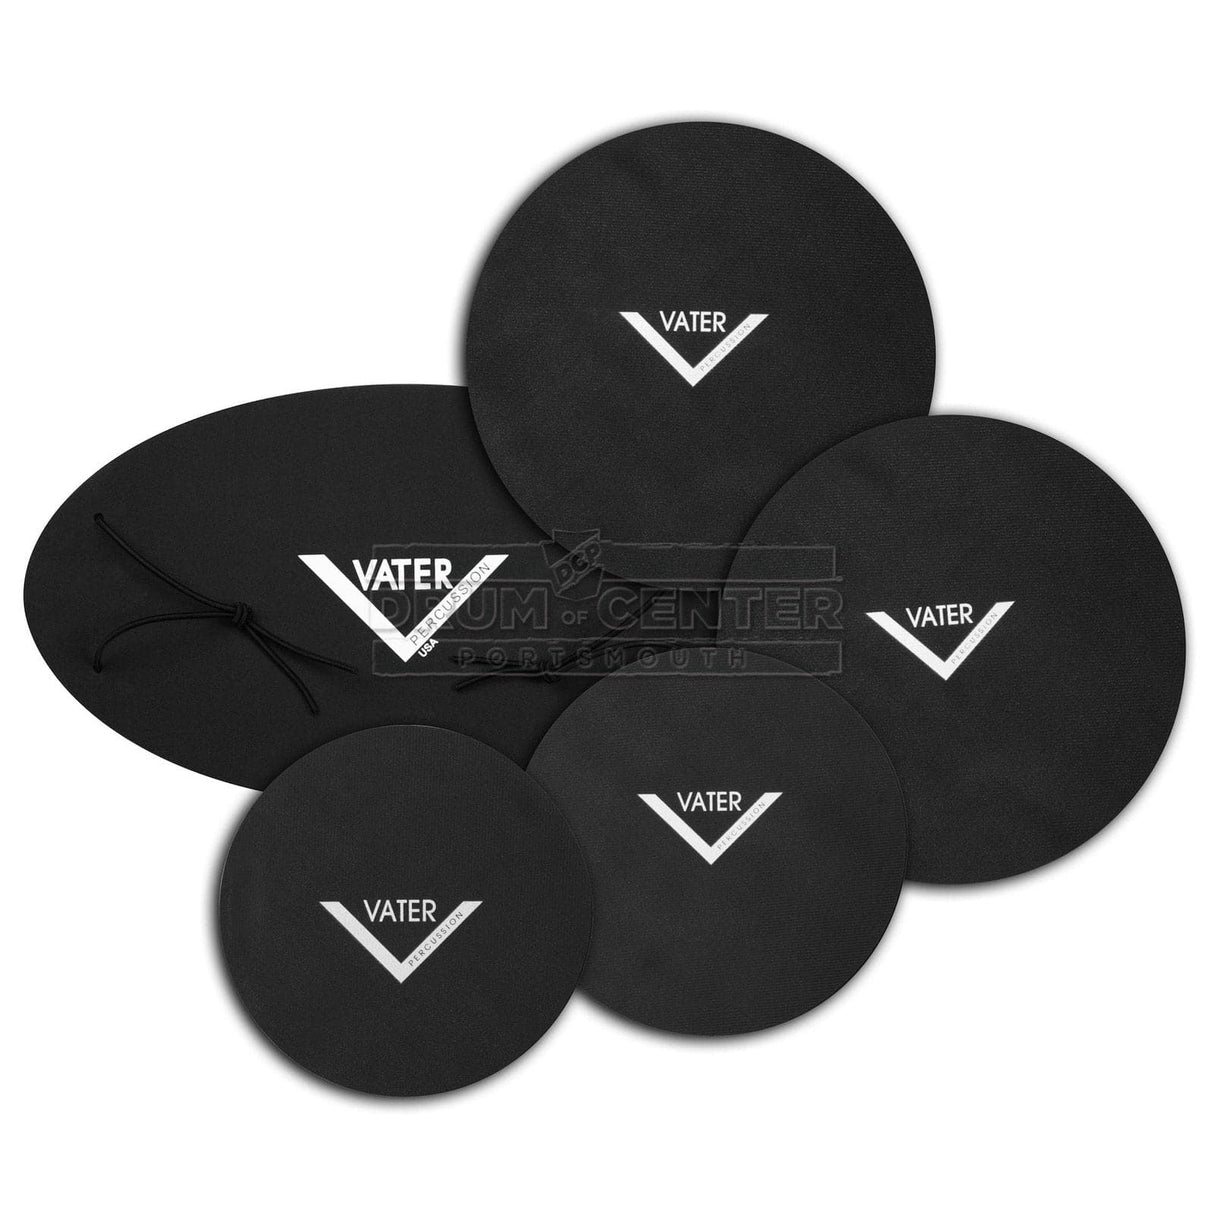 Vater Noise Guard Complete Fusion Pack